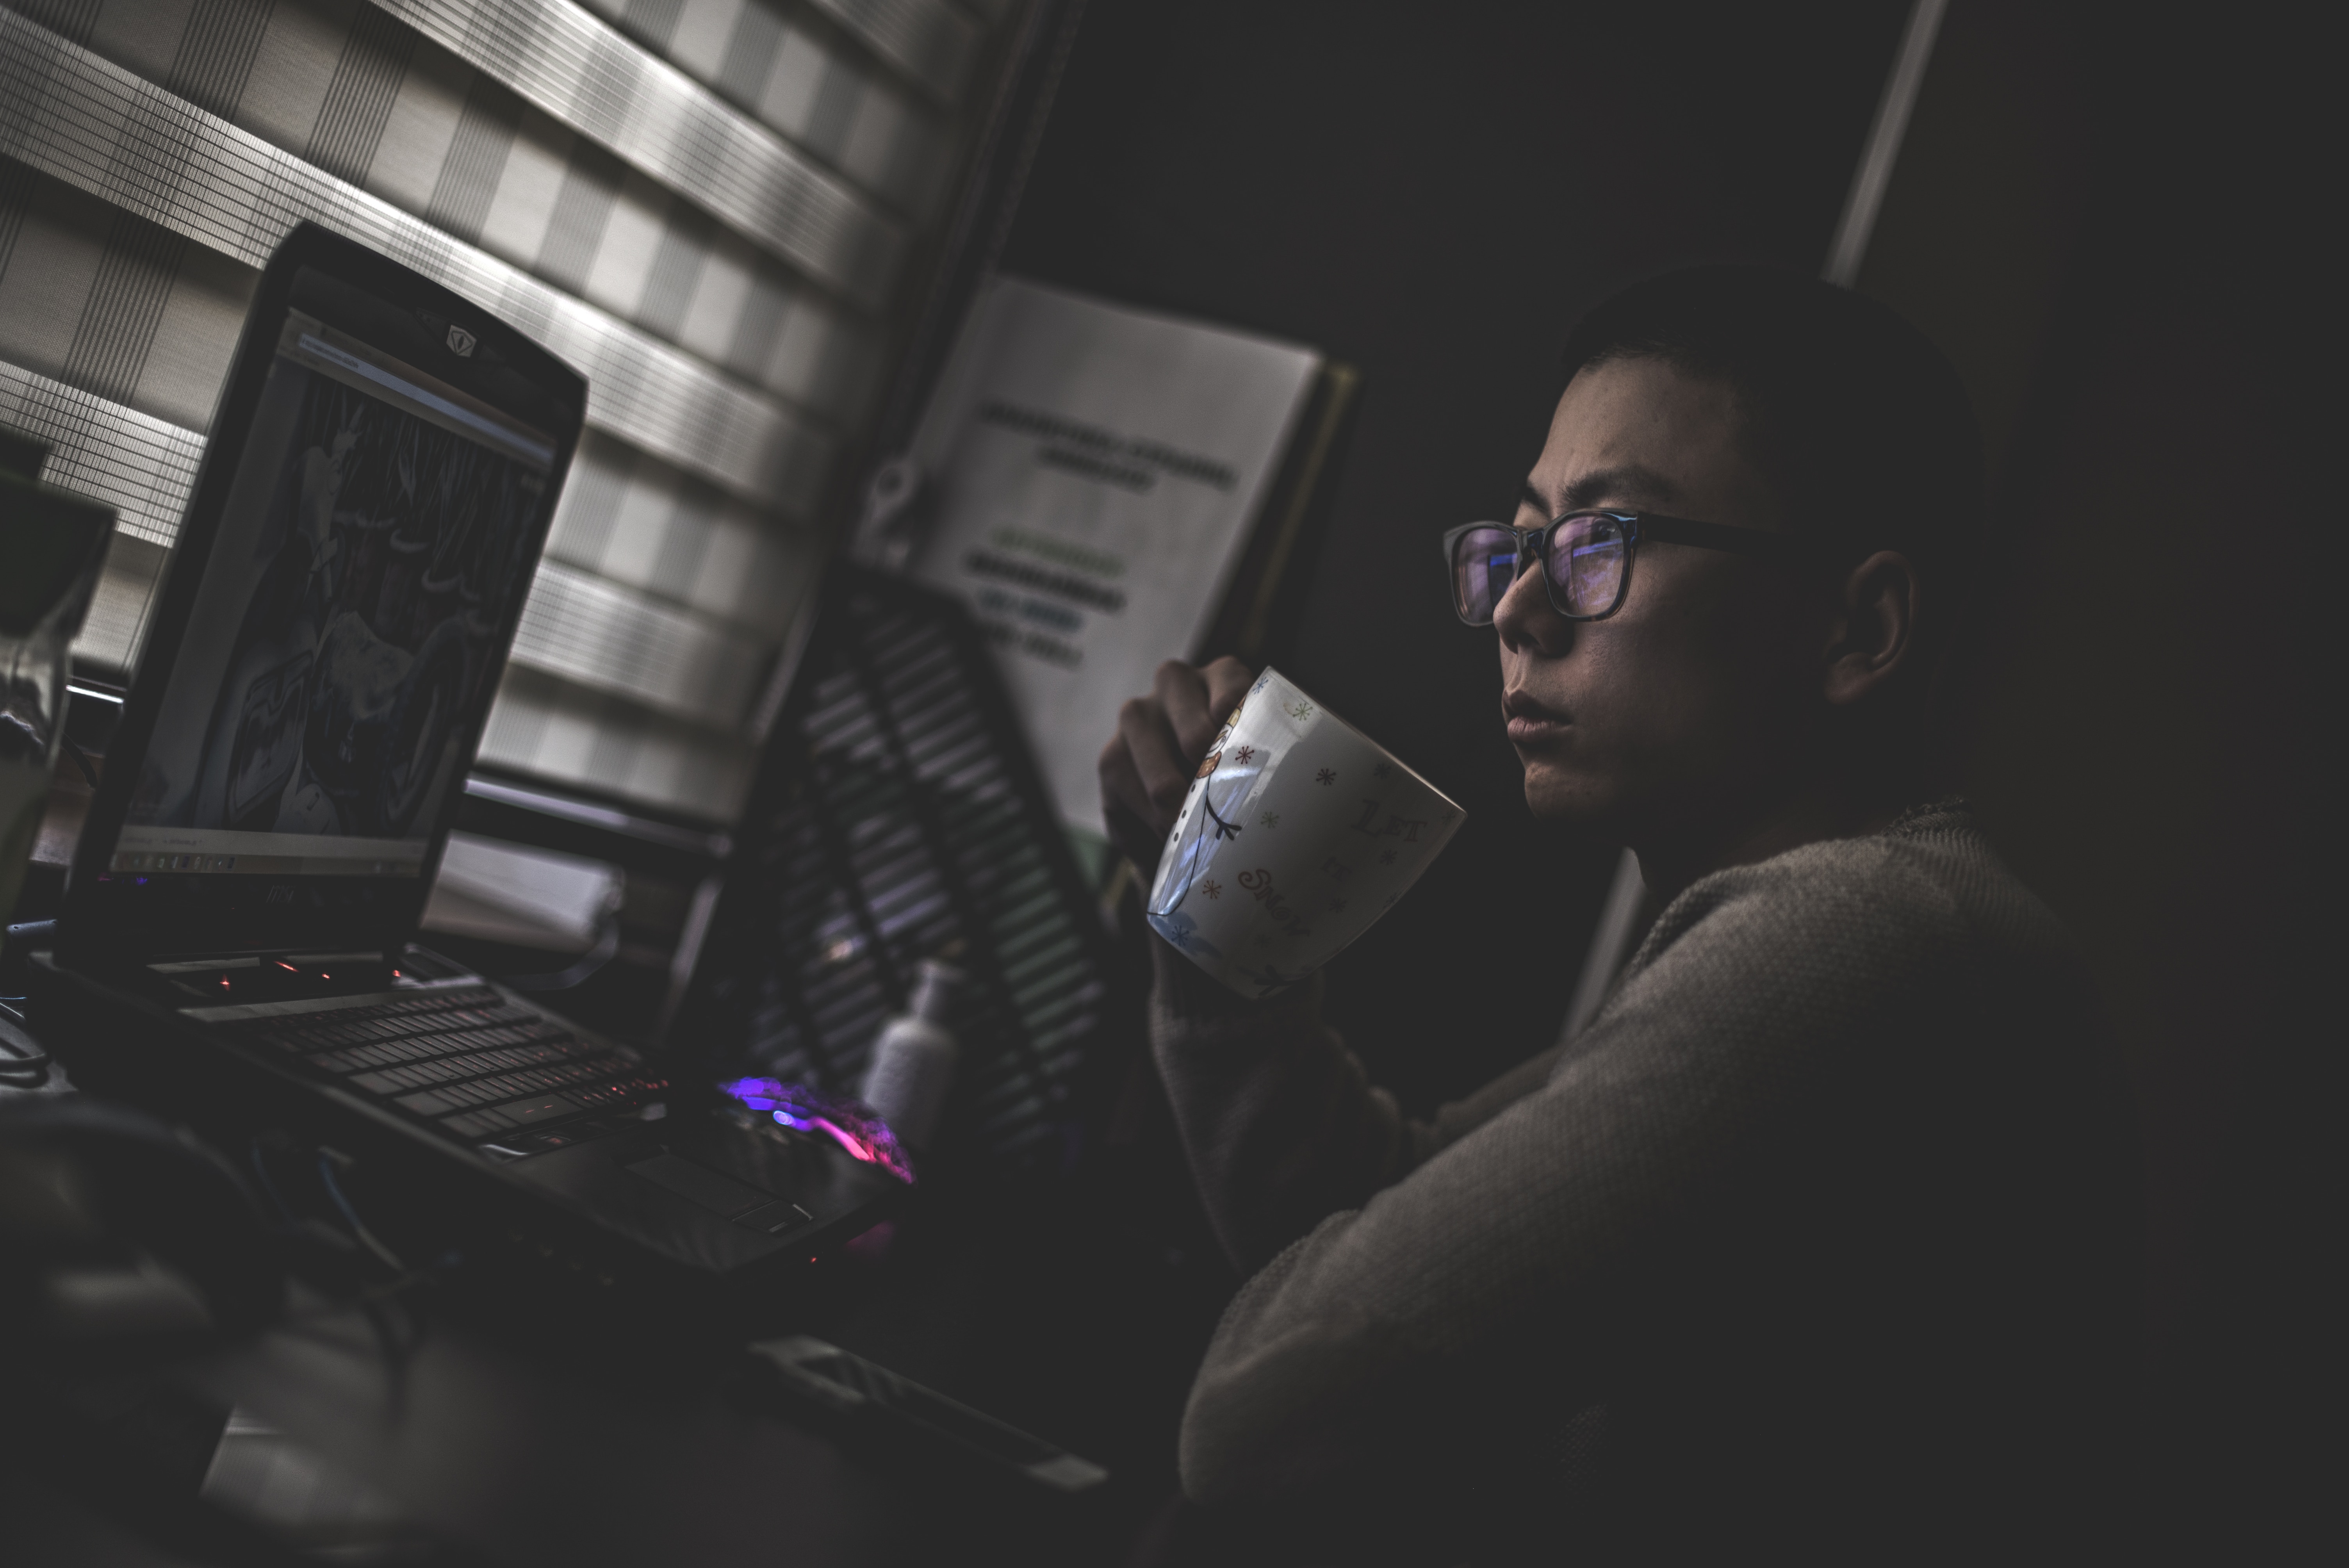 a woman is holding a mug watching movie in her laptop